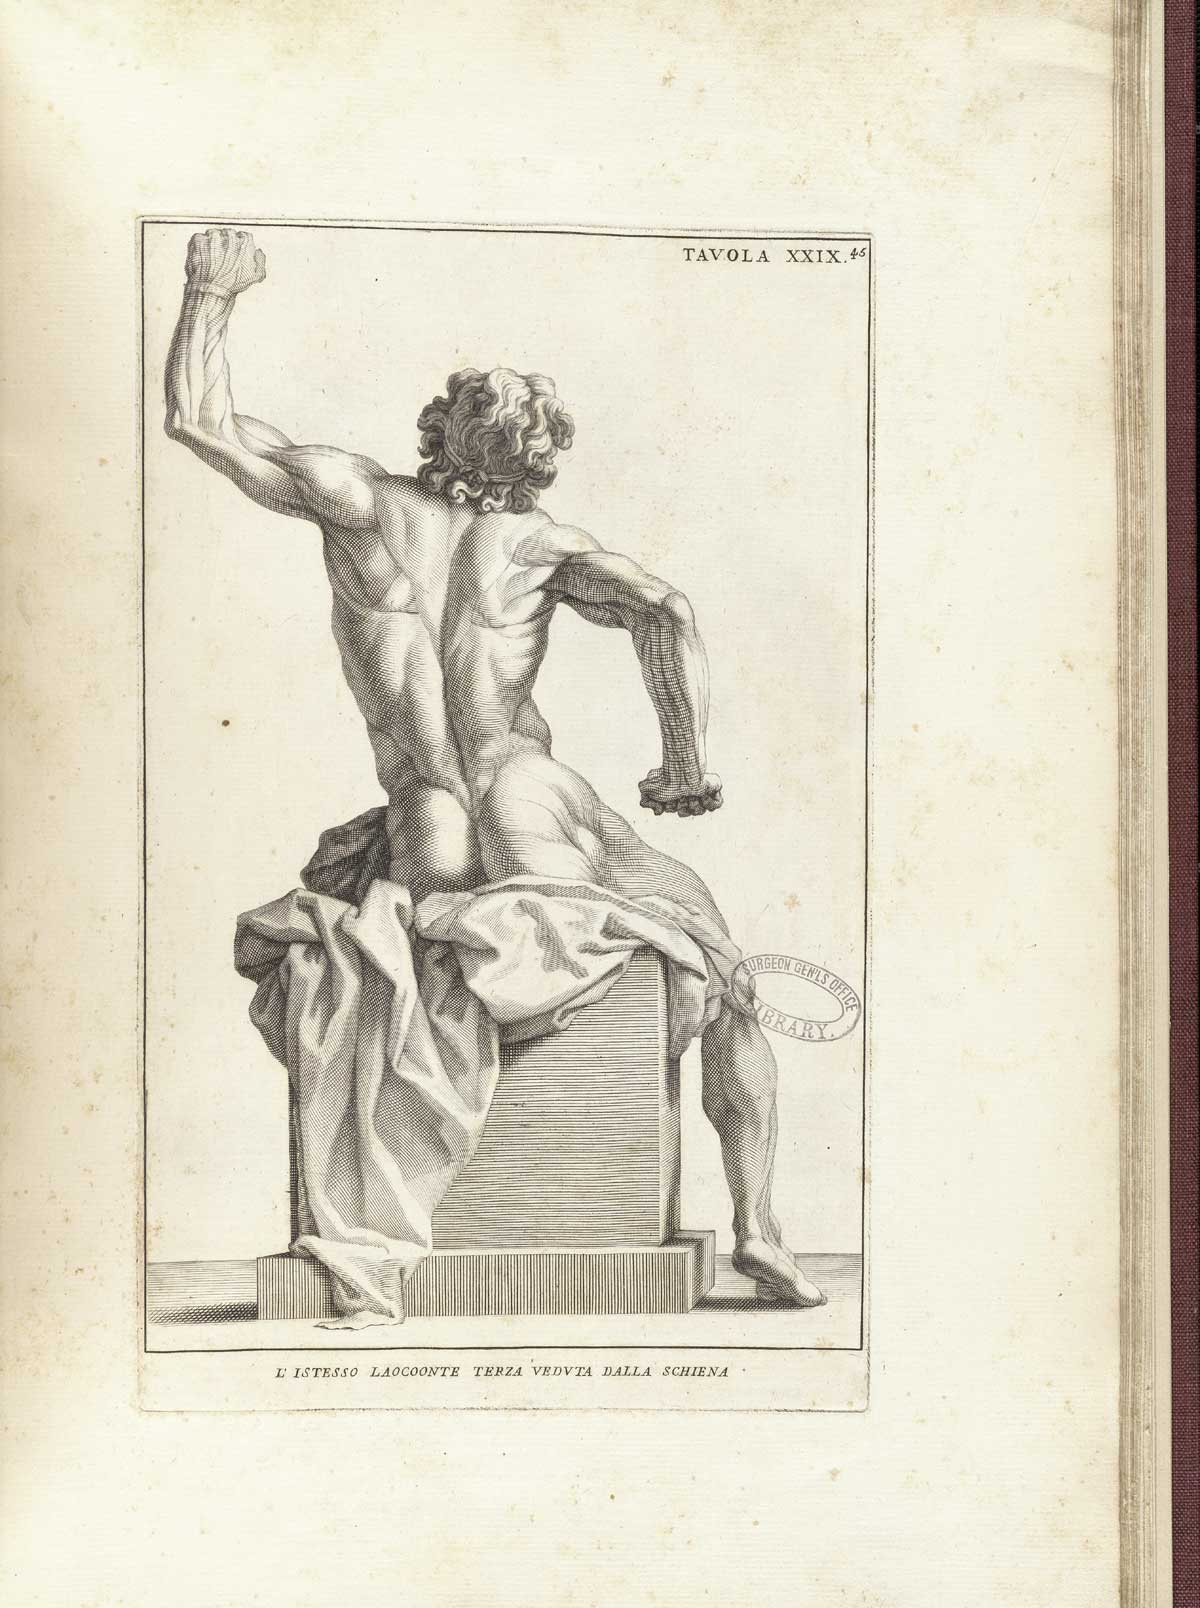 Engraving of the statue of Laocoon without his sons or the large snake which ate them; the nude seated figure is viewed from behind and has his left arm raised in struggle clenched in a fist as his right arm pushes down at his side, also with a clenched fist; his face faces the viewer with a look of struggle and agony; from Bernardino Genga’s Anatomia per uso et intelligenza del disegno, NLM Call no.: WZ 250 G329an 1691.